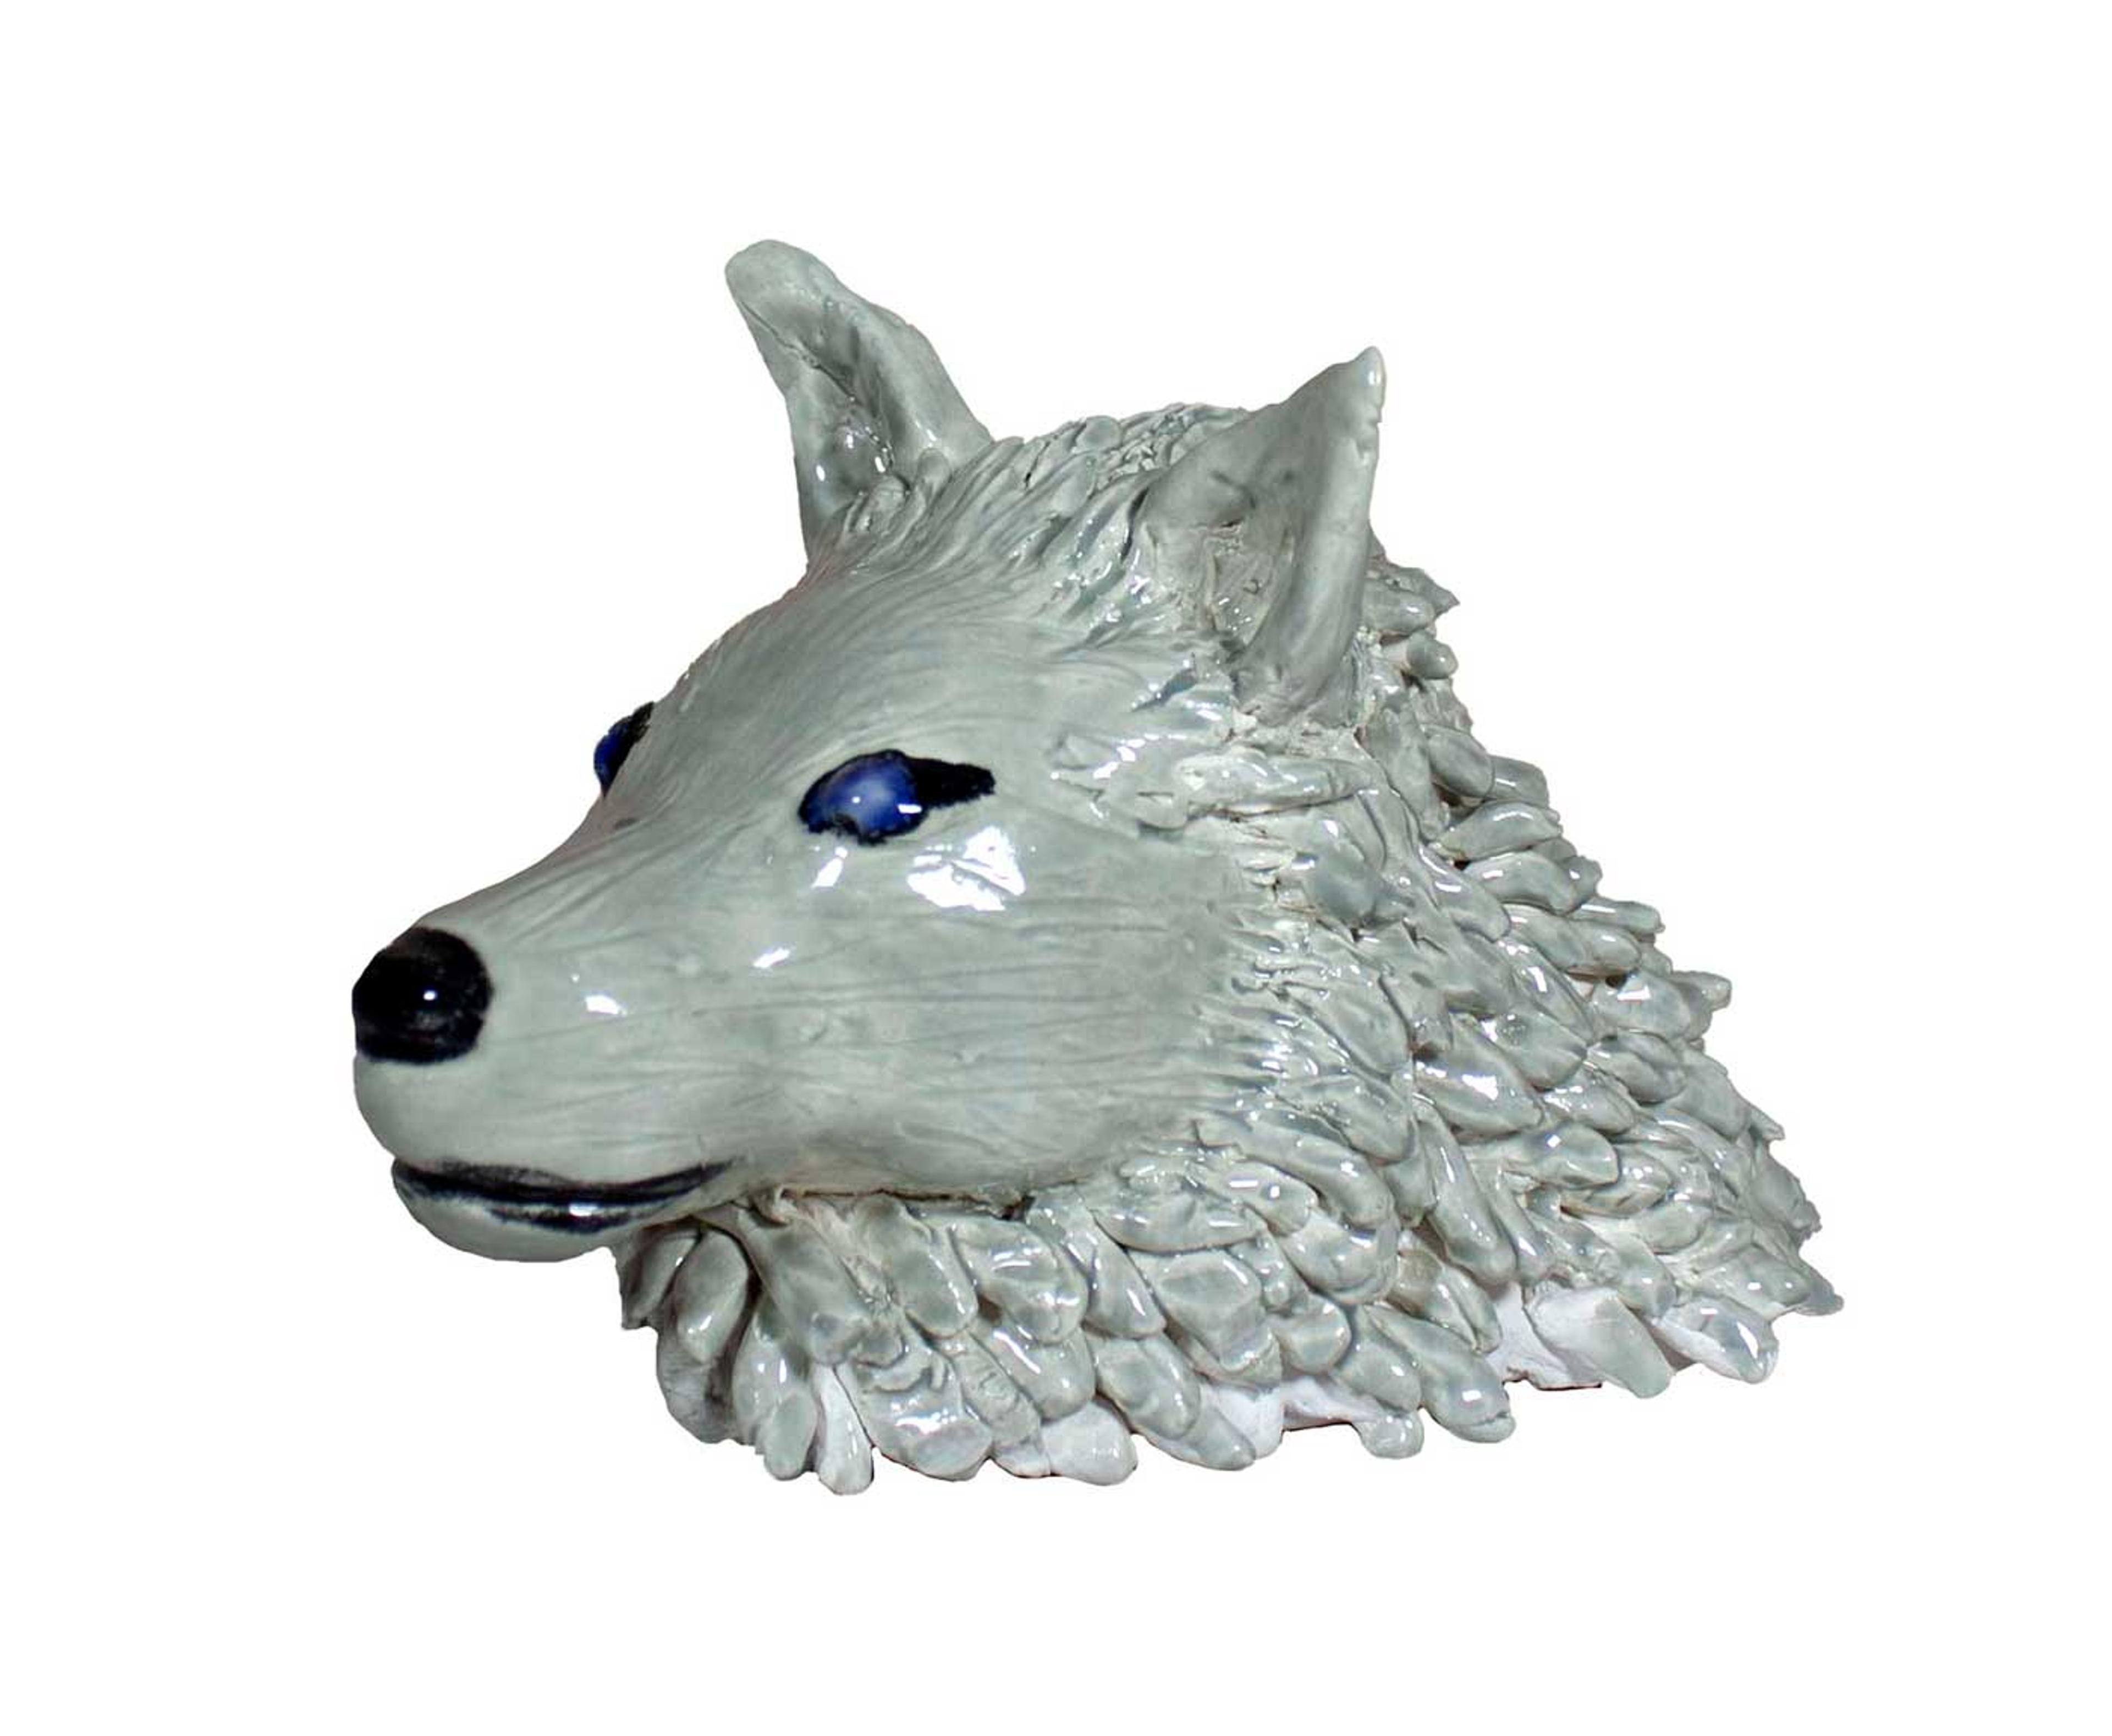 Sculpture of a white wolf's head with blue eyes.